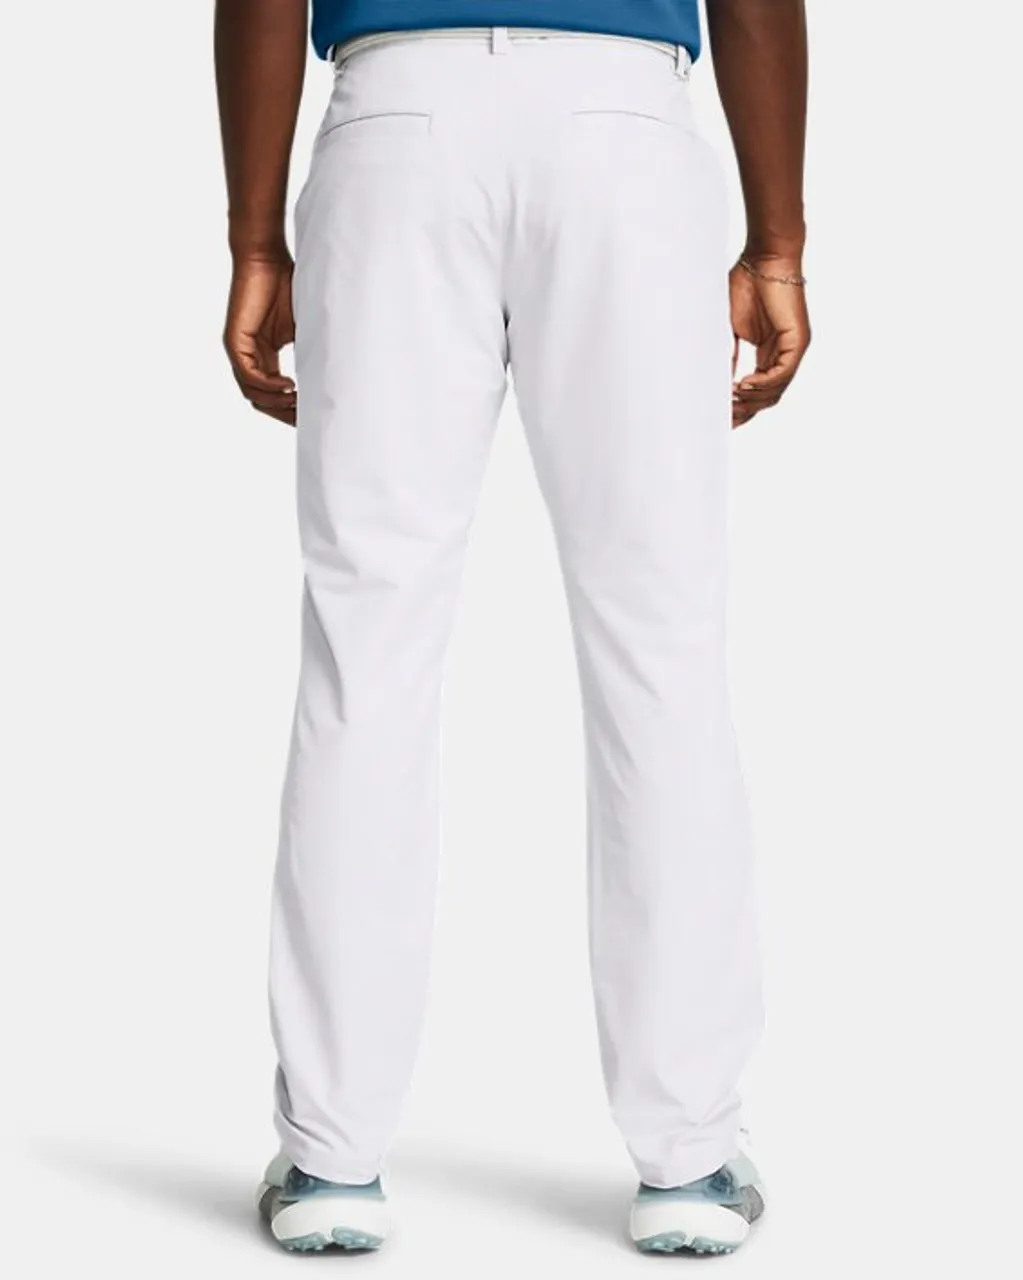 Men's  Under Armour  Matchplay Tapered Pants Halo Gray / Halo Gray